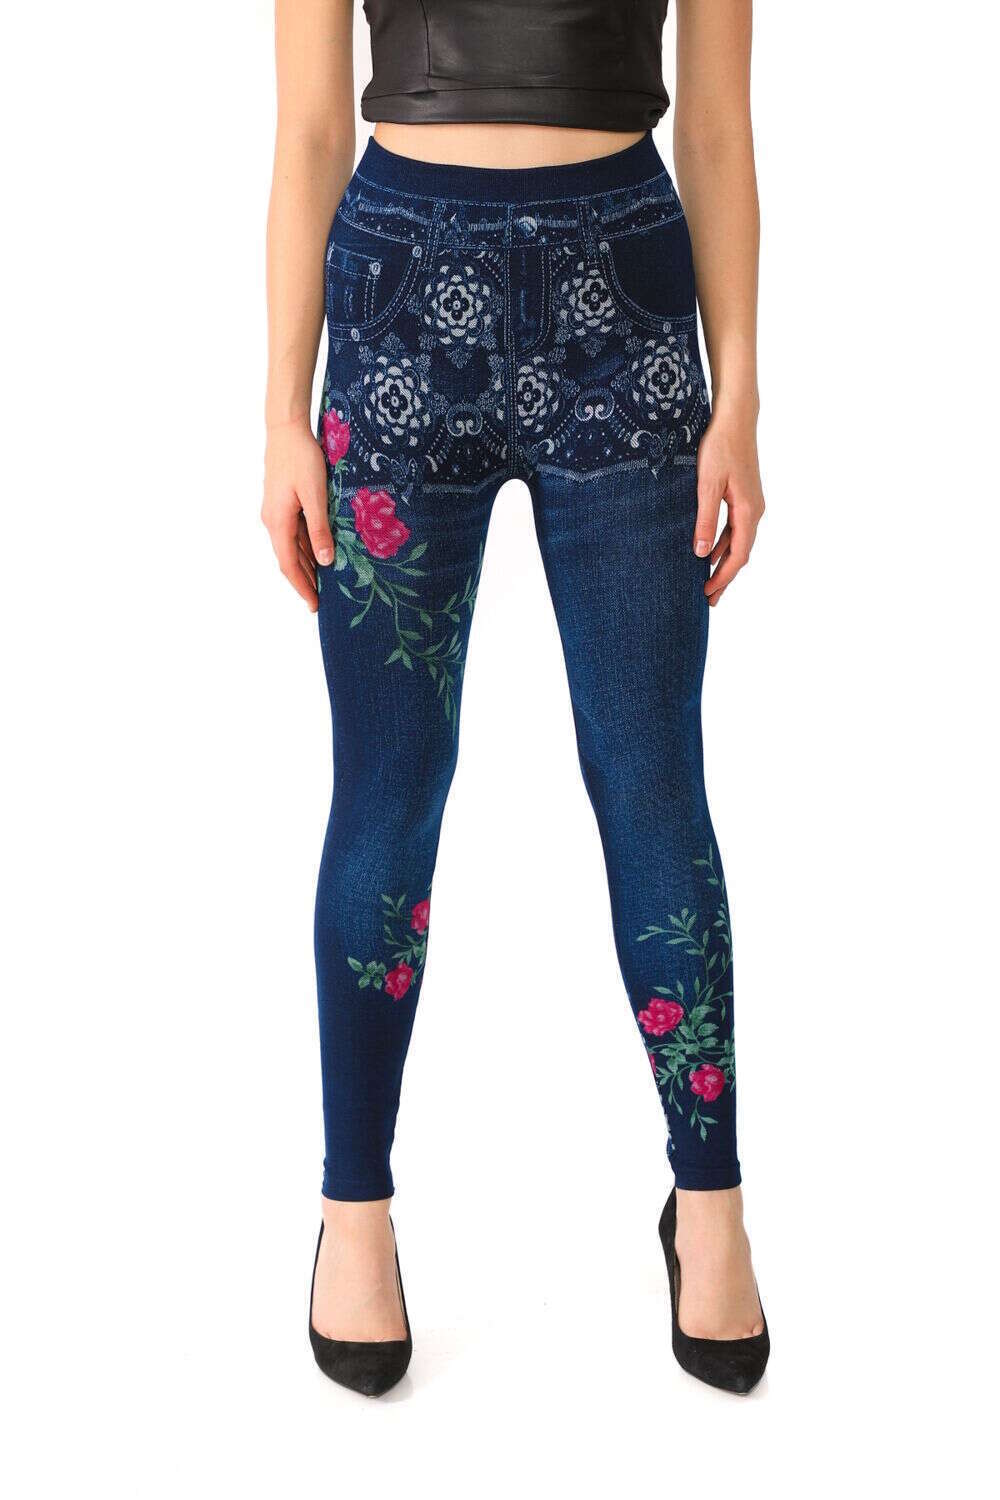 Denim Leggings with Red Floral Paettern